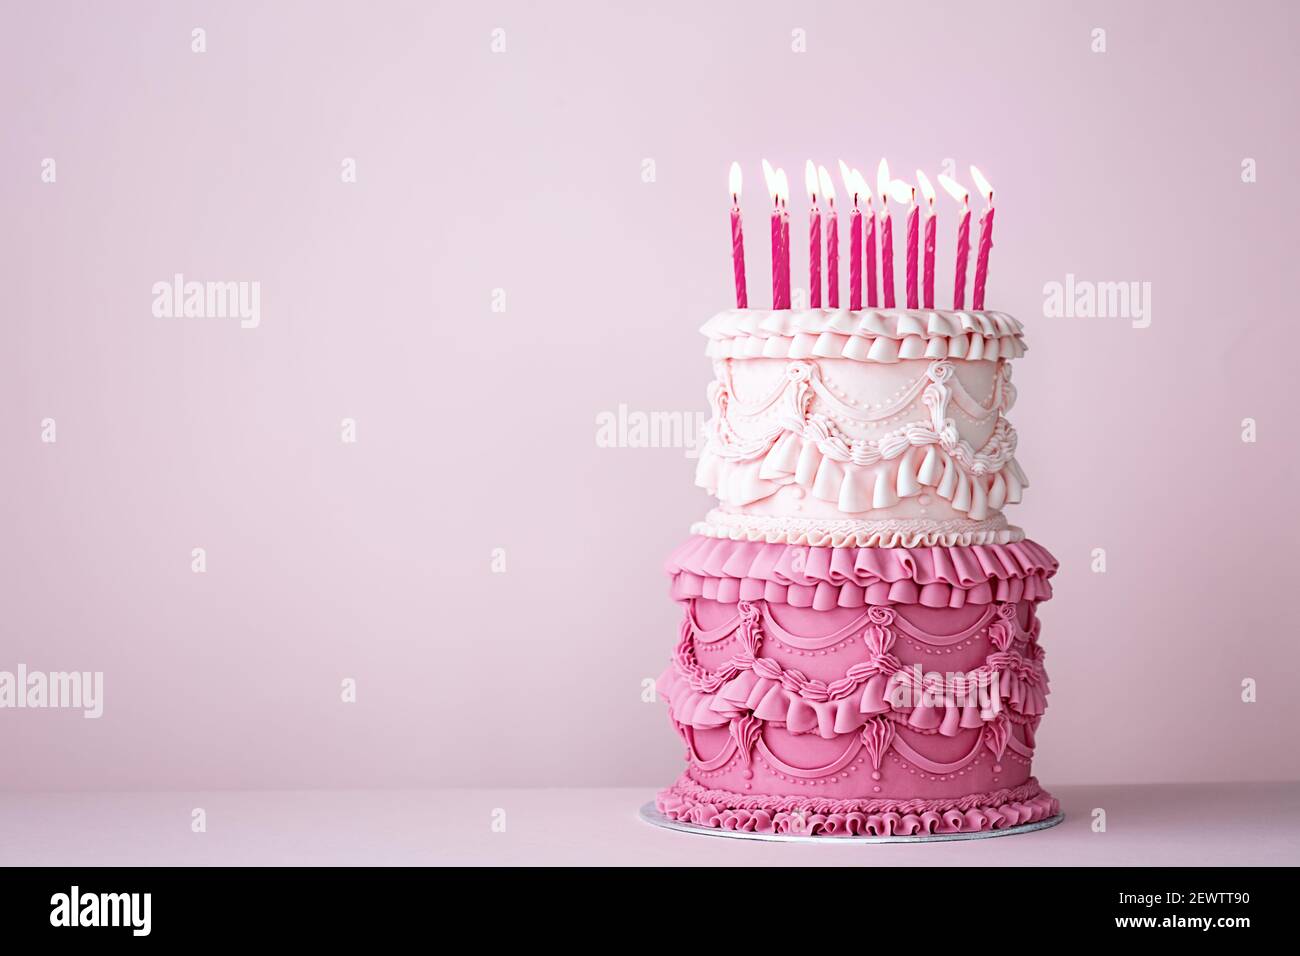 Ornate vintage buttercream birthday cake with buttercream ruffles and frills Stock Photo